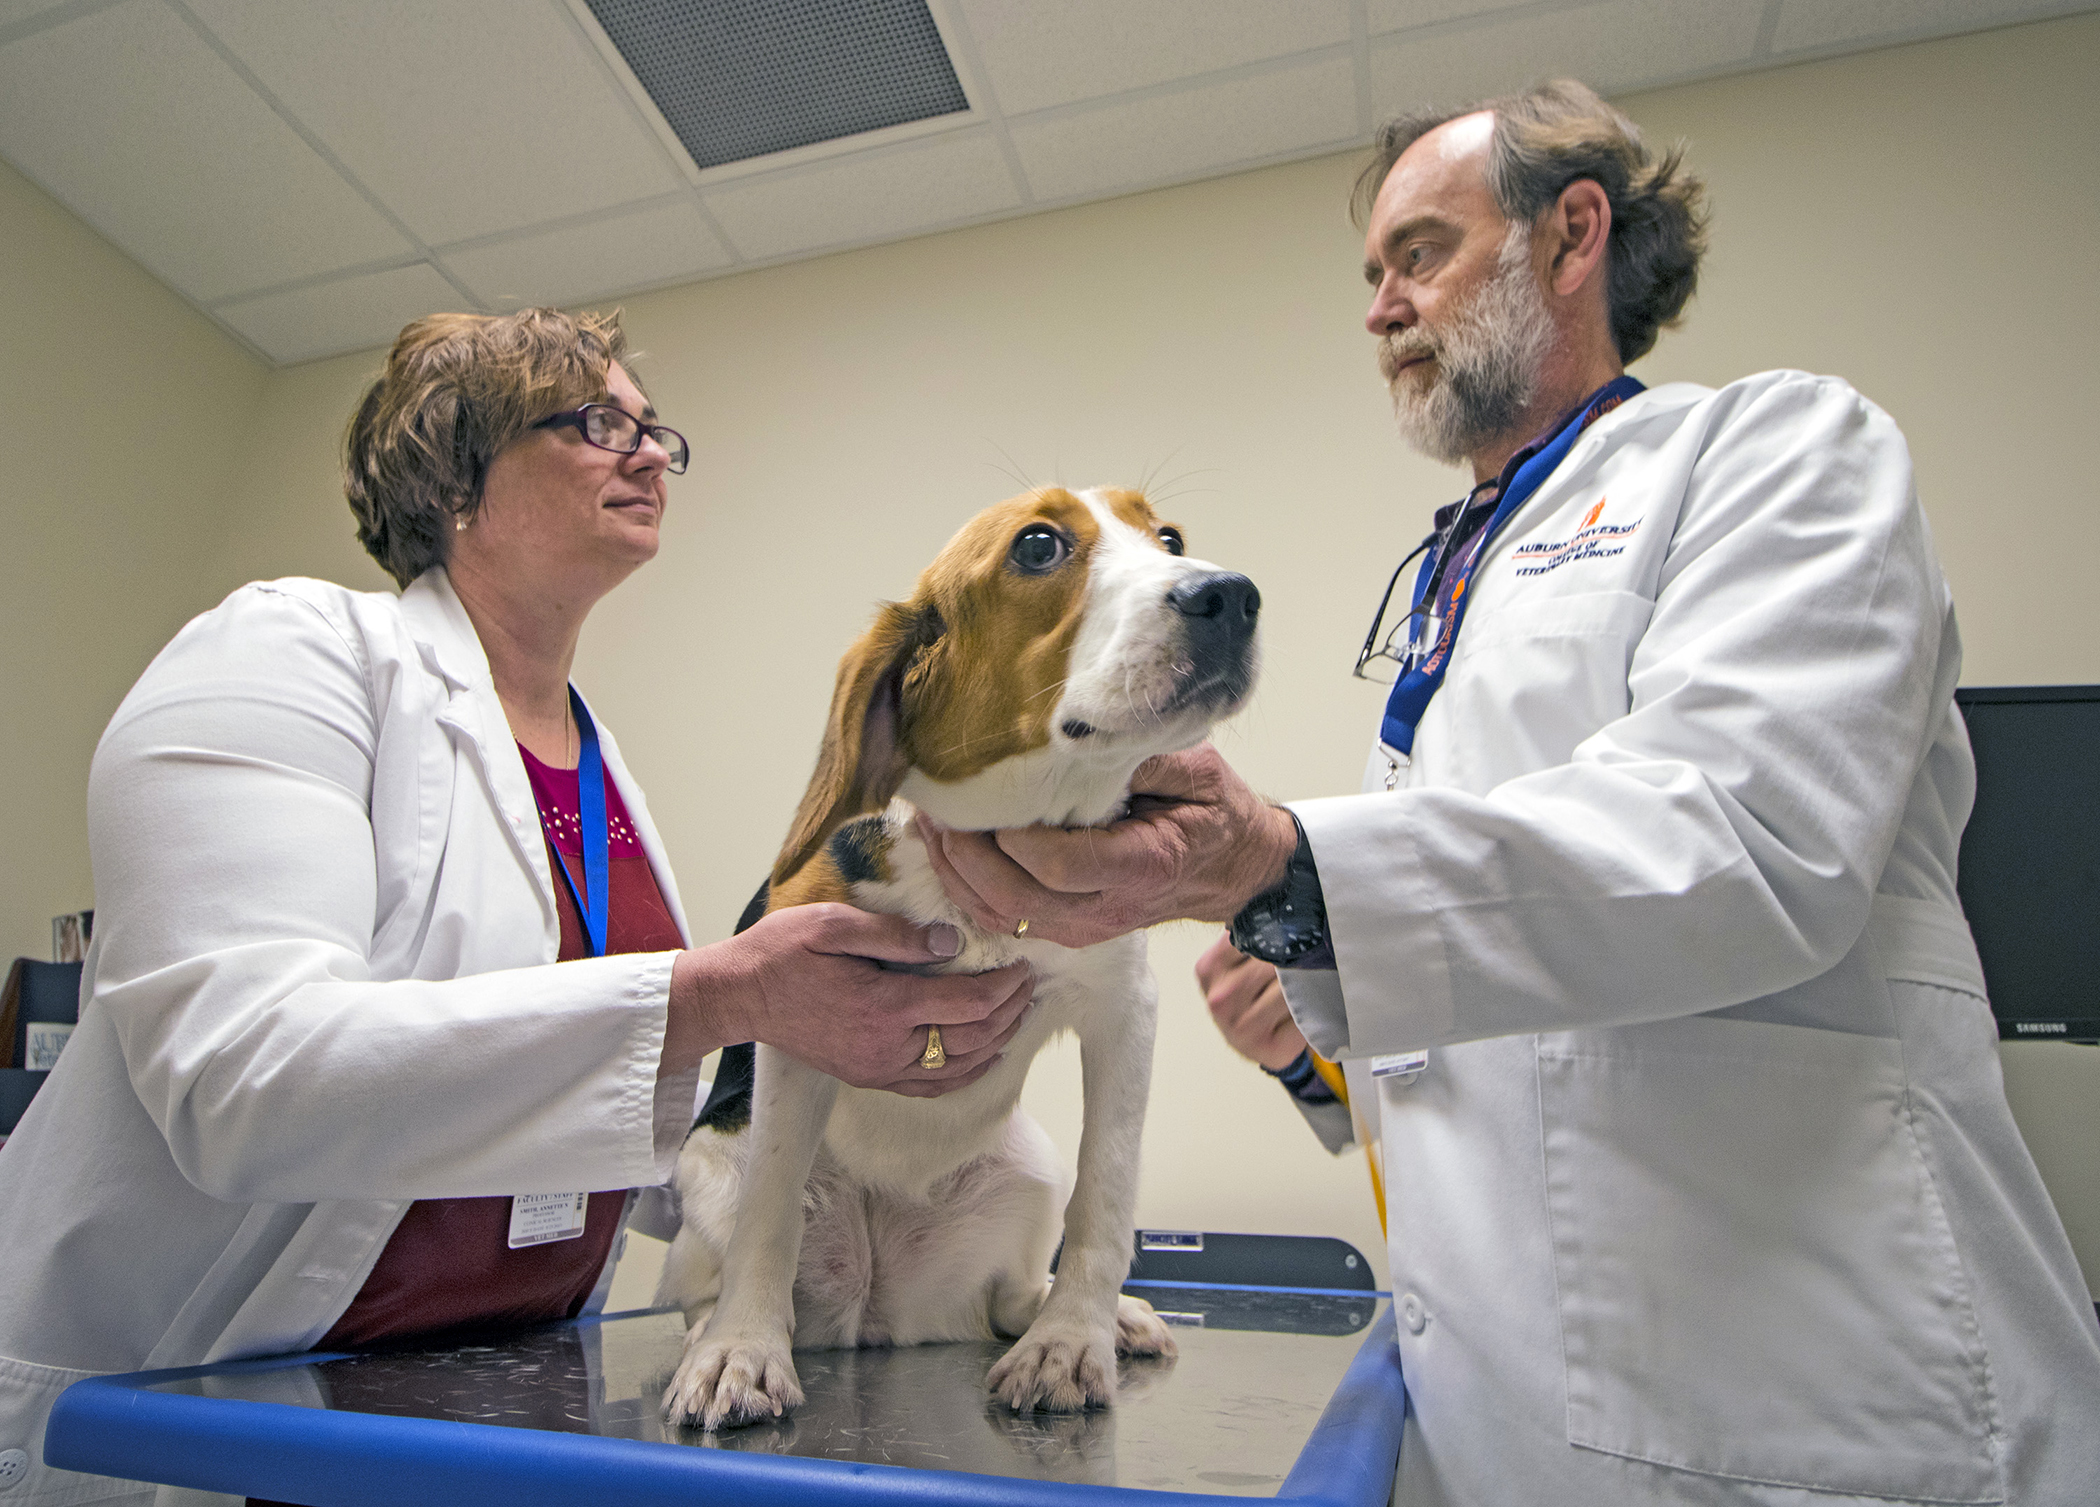 Dr. Annette Smith, left, the Robert and Charlotte Lowder Distinguished Professor in Oncology with the Department of Clinical Sciences, and Dr. Bruce Smith, a professor in the Department of Pathobiology and director of the Auburn University Research Initiative in Cancer, or AURIC, are shown with a canine patient in an exam room at the Wilford and Kate Bailey Small Animal Teaching Hospital.